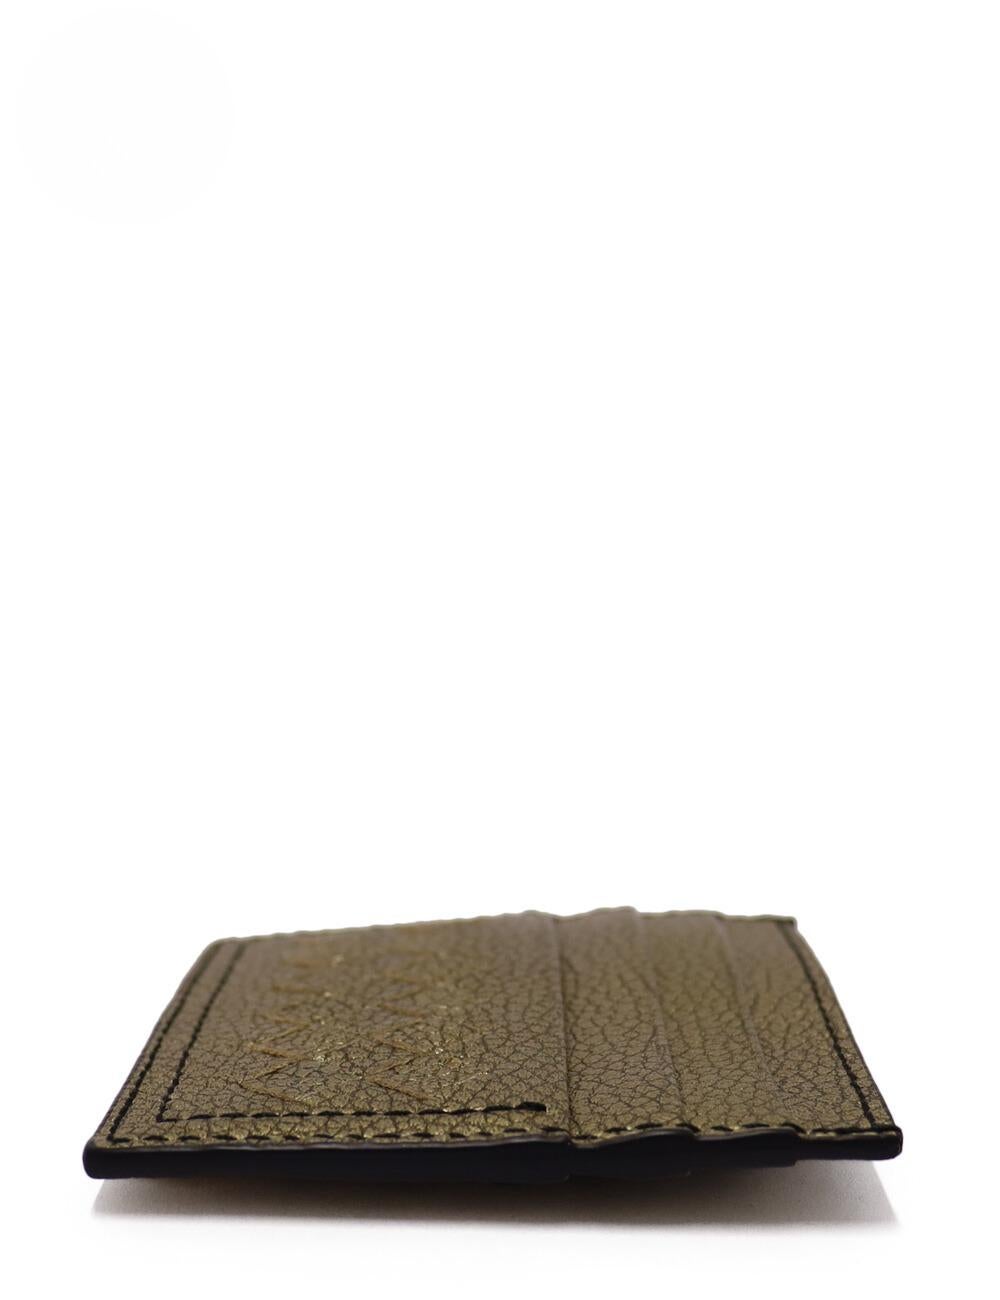 Bottega Veneta Bronze Intrecciato Leather Card Holder, Features Nappa leather, Hand-woven intrecciato panel, Single bill pocket, and Six card slots.

Material: Leather
Height: 8cm
Width: 10cm
Depth: 0.5cm
Overall condition: Excellent
Interior